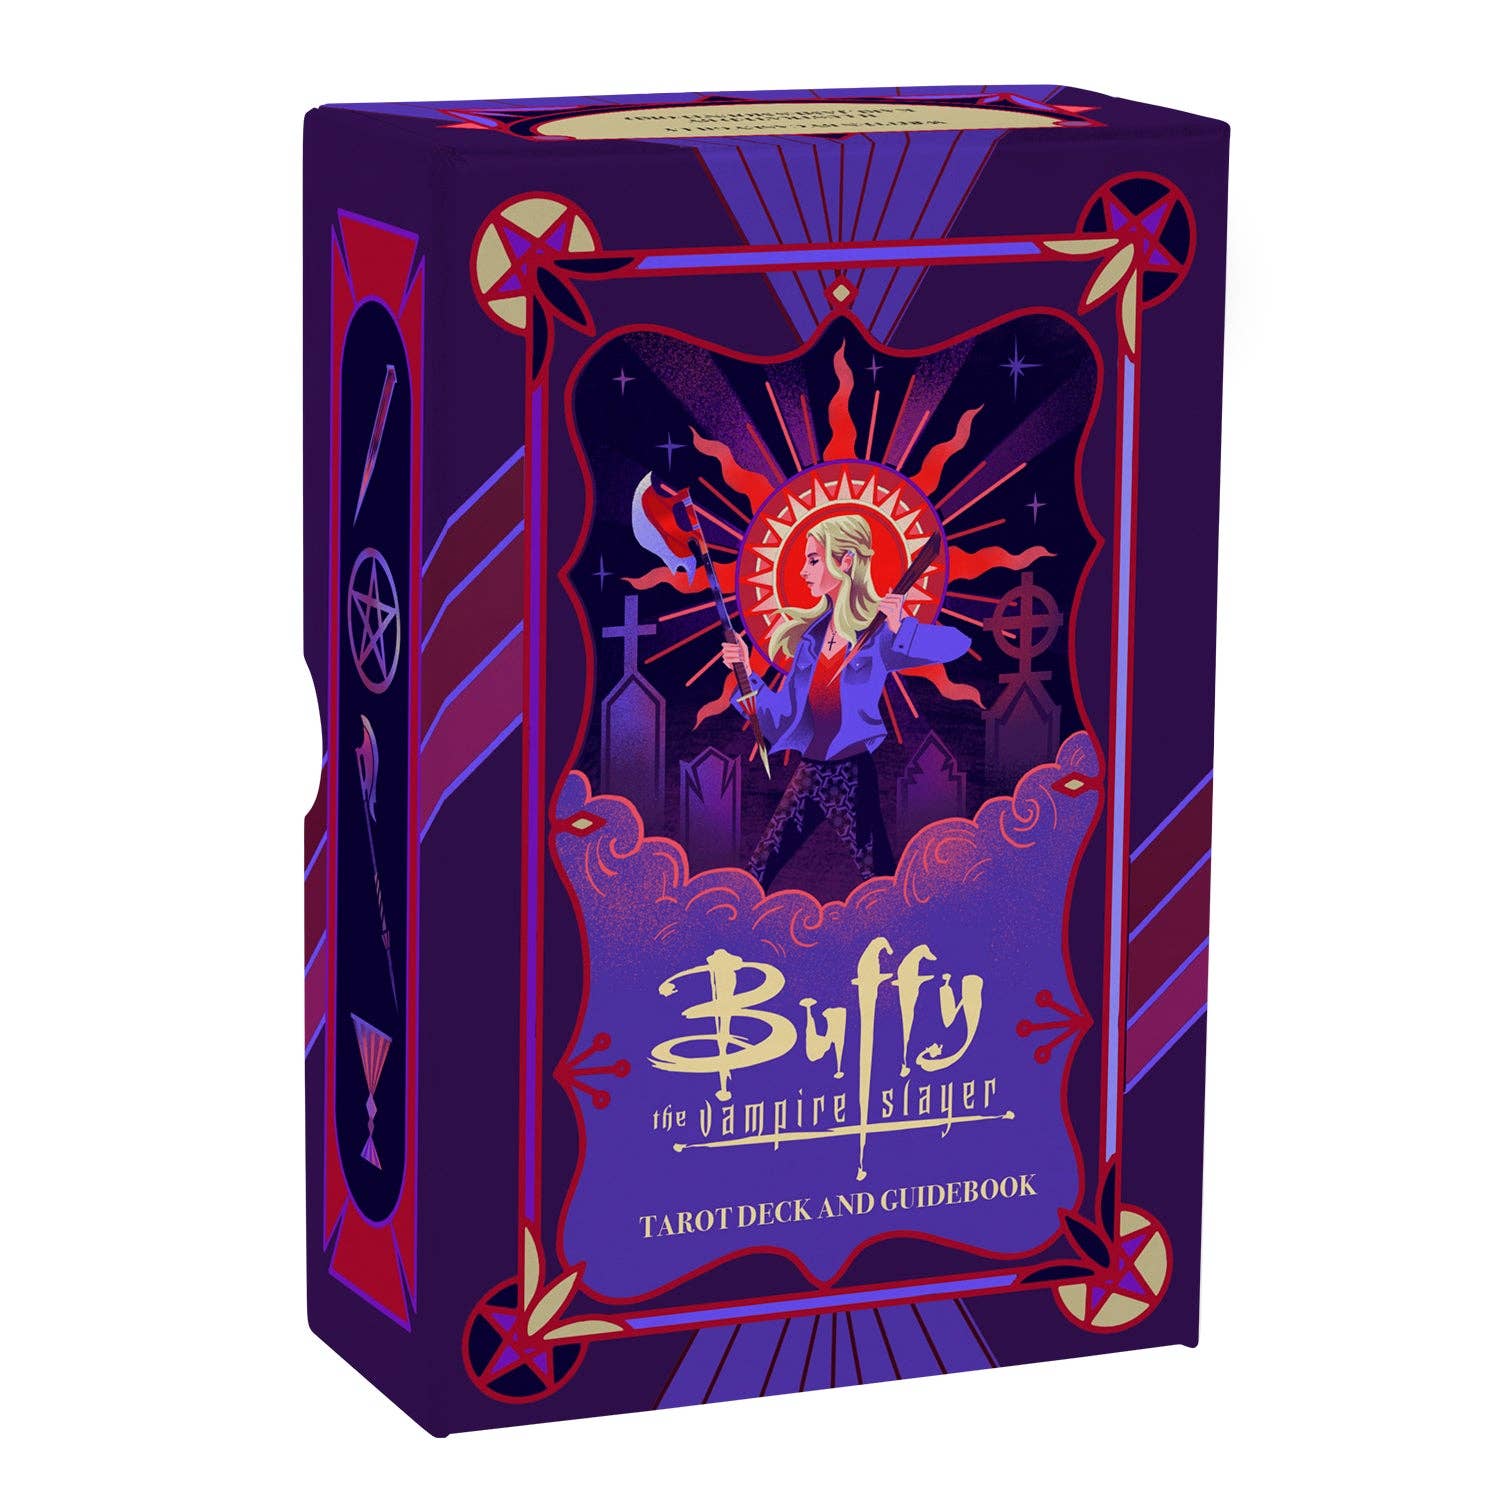 Insight Editions - Buffy the Vampire Slayer Tarot Deck and Guidebook - Bards & Cards